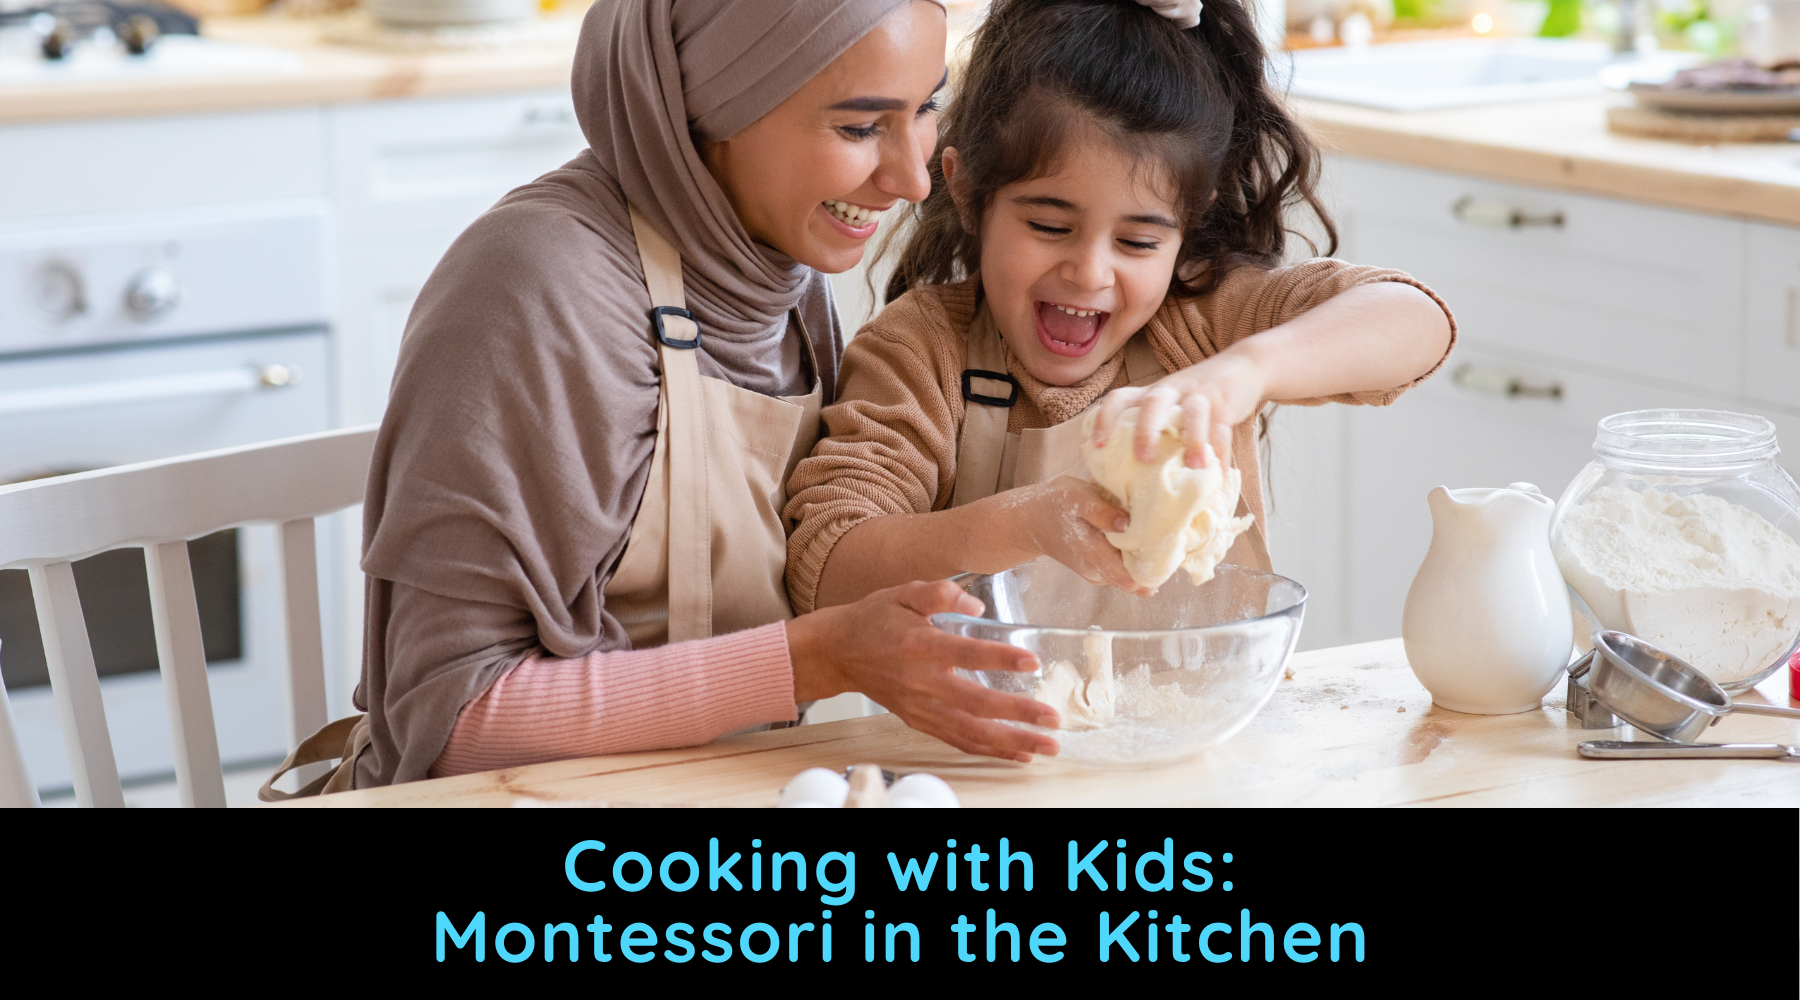 Our Most Used Brand for Kids Kitchen Tools - how we montessori